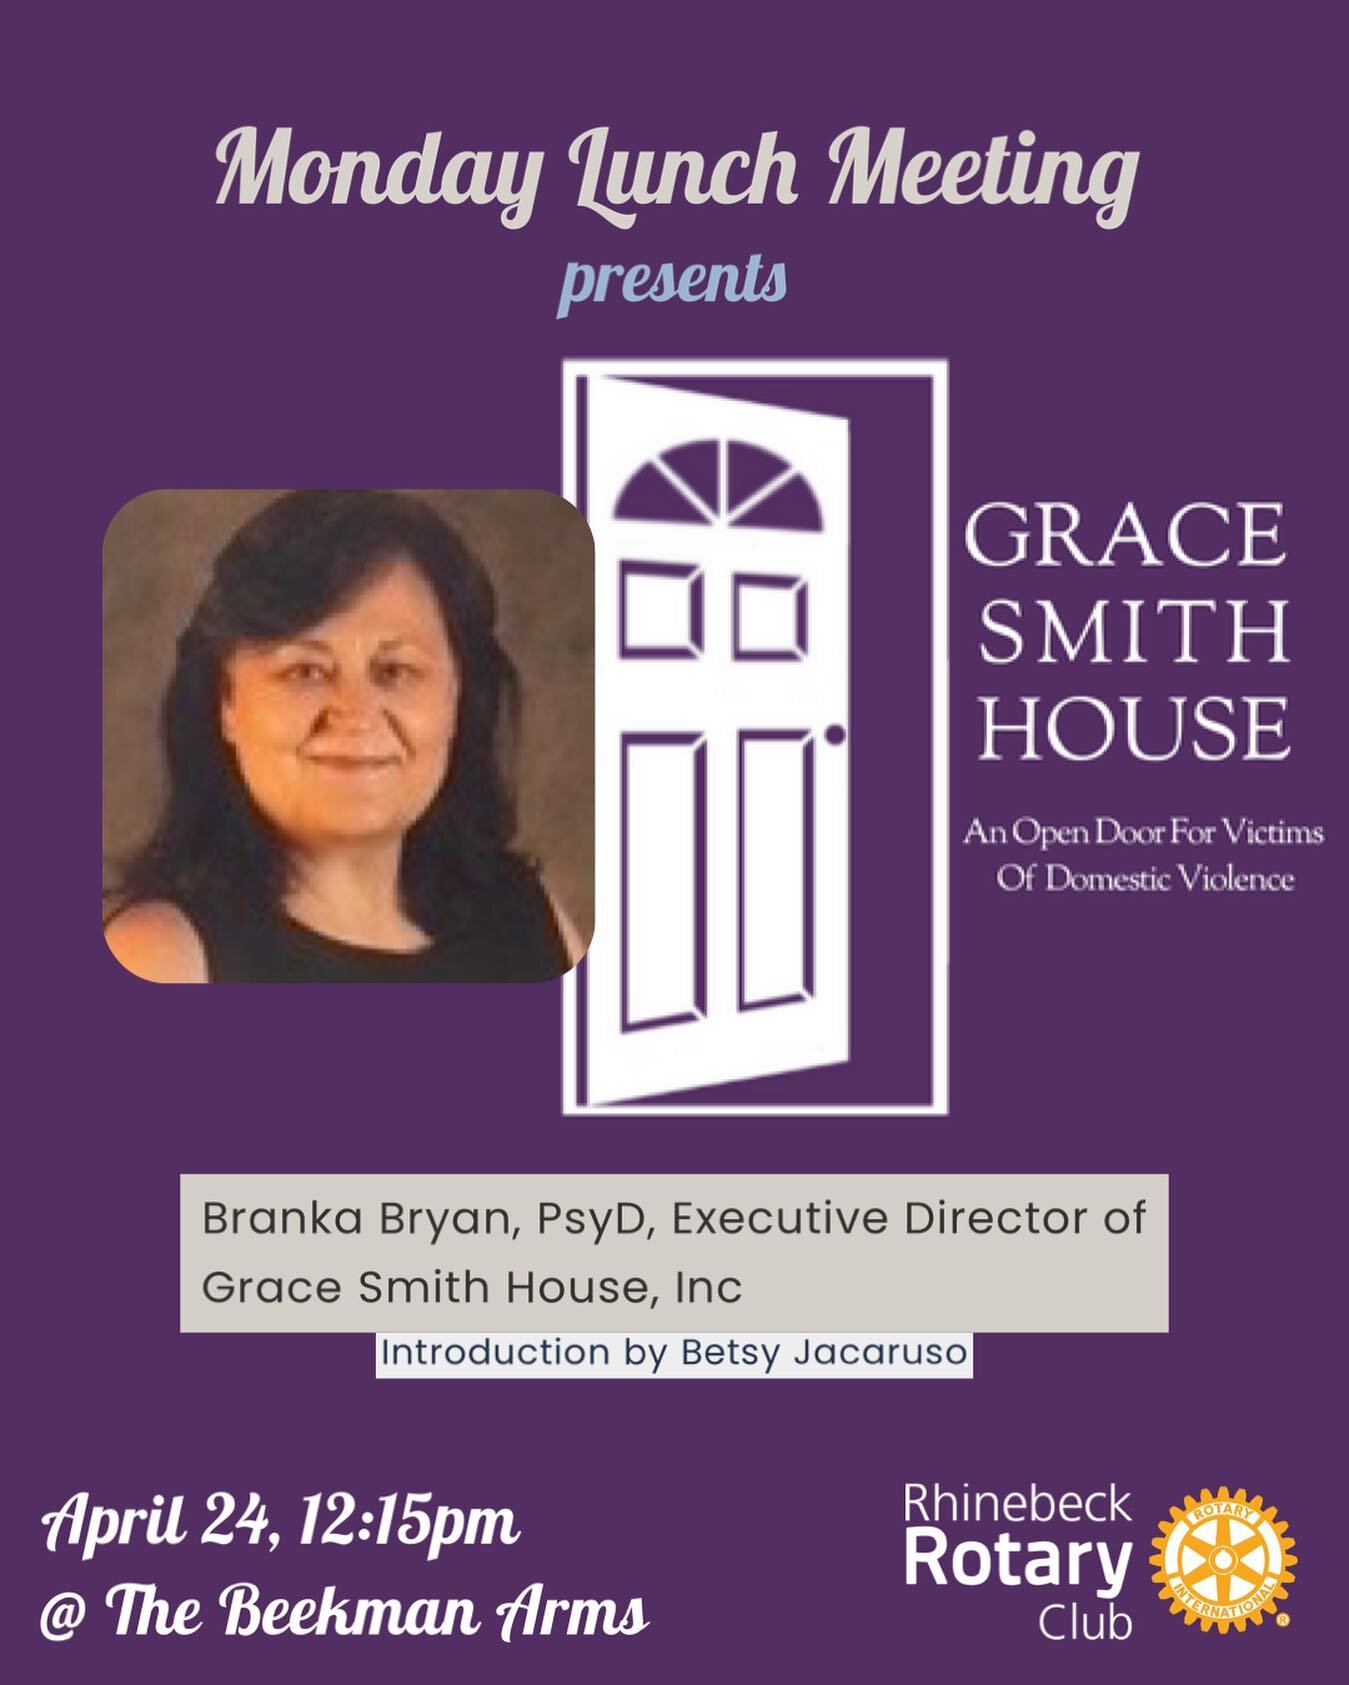 Monday at The Beekman I have invited speaker Branka Bryan from Grace Smith House to present at the Rhinebeck Rotary lunch meeting. Please join us at 12:15 in the banquet room for this special presentation. 
@rhinebeckrotary